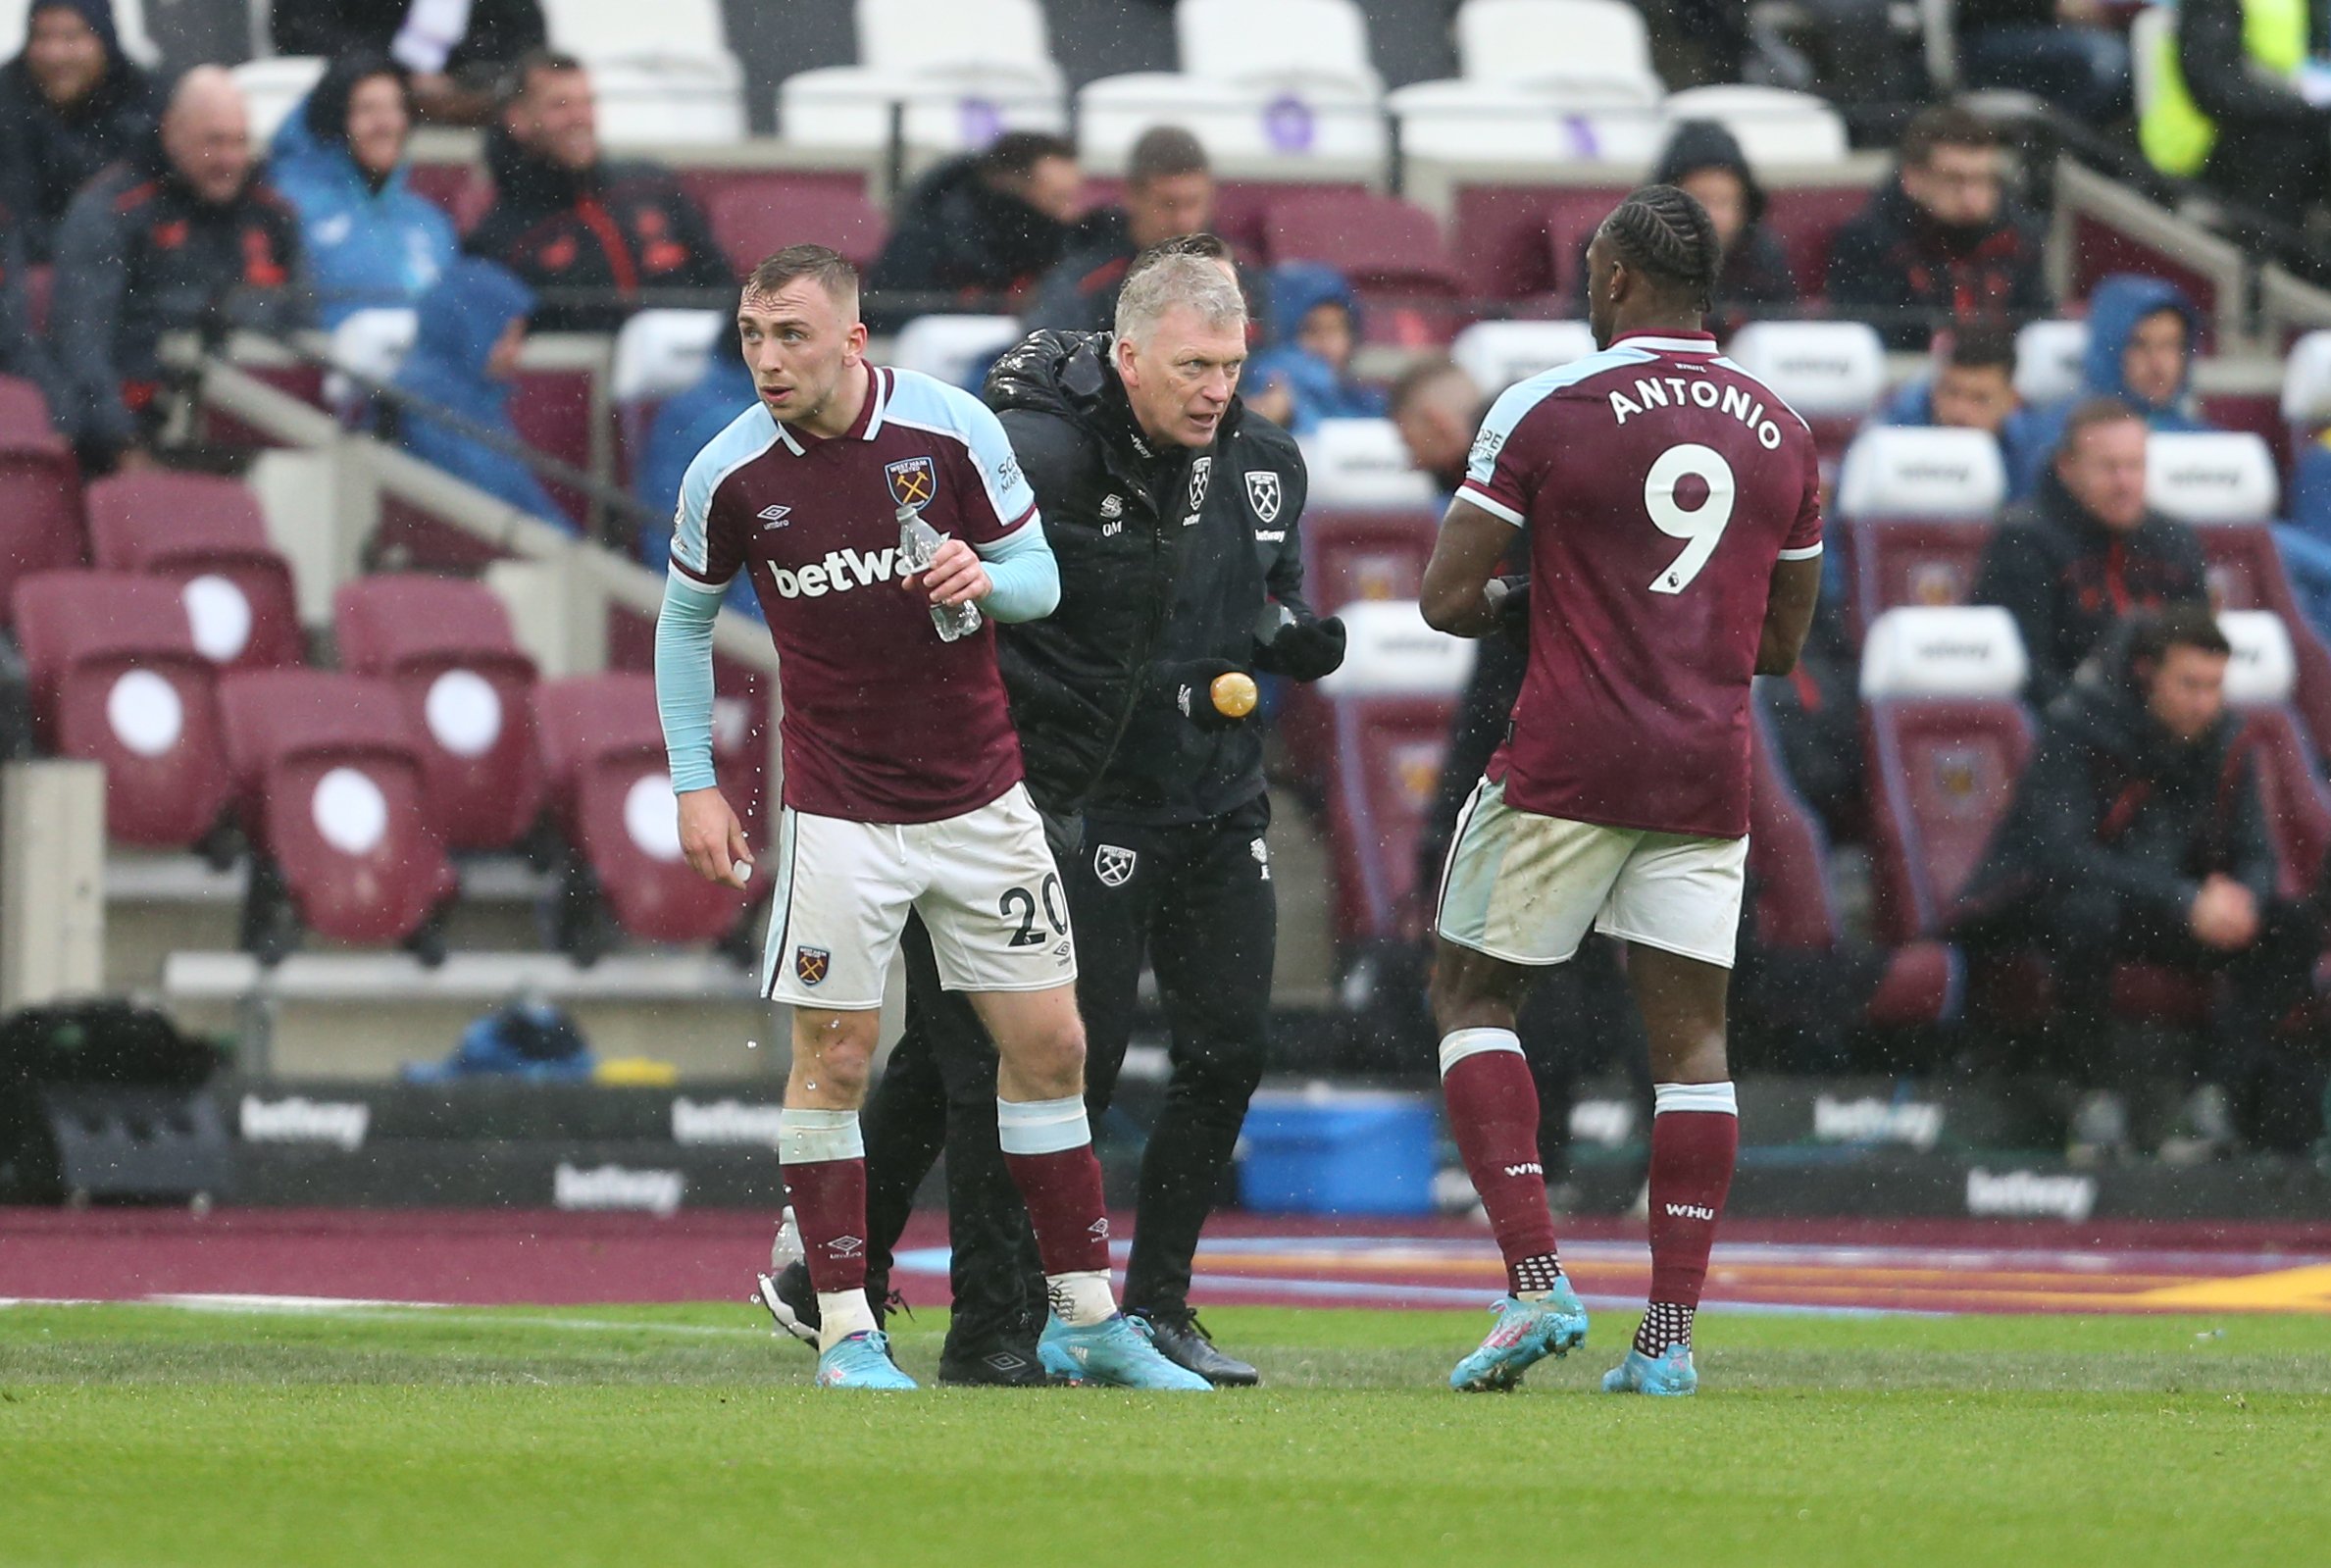 Video shows David Moyes shouting something to Michail Antonio on the touchline that totally sums up the striker's recent form